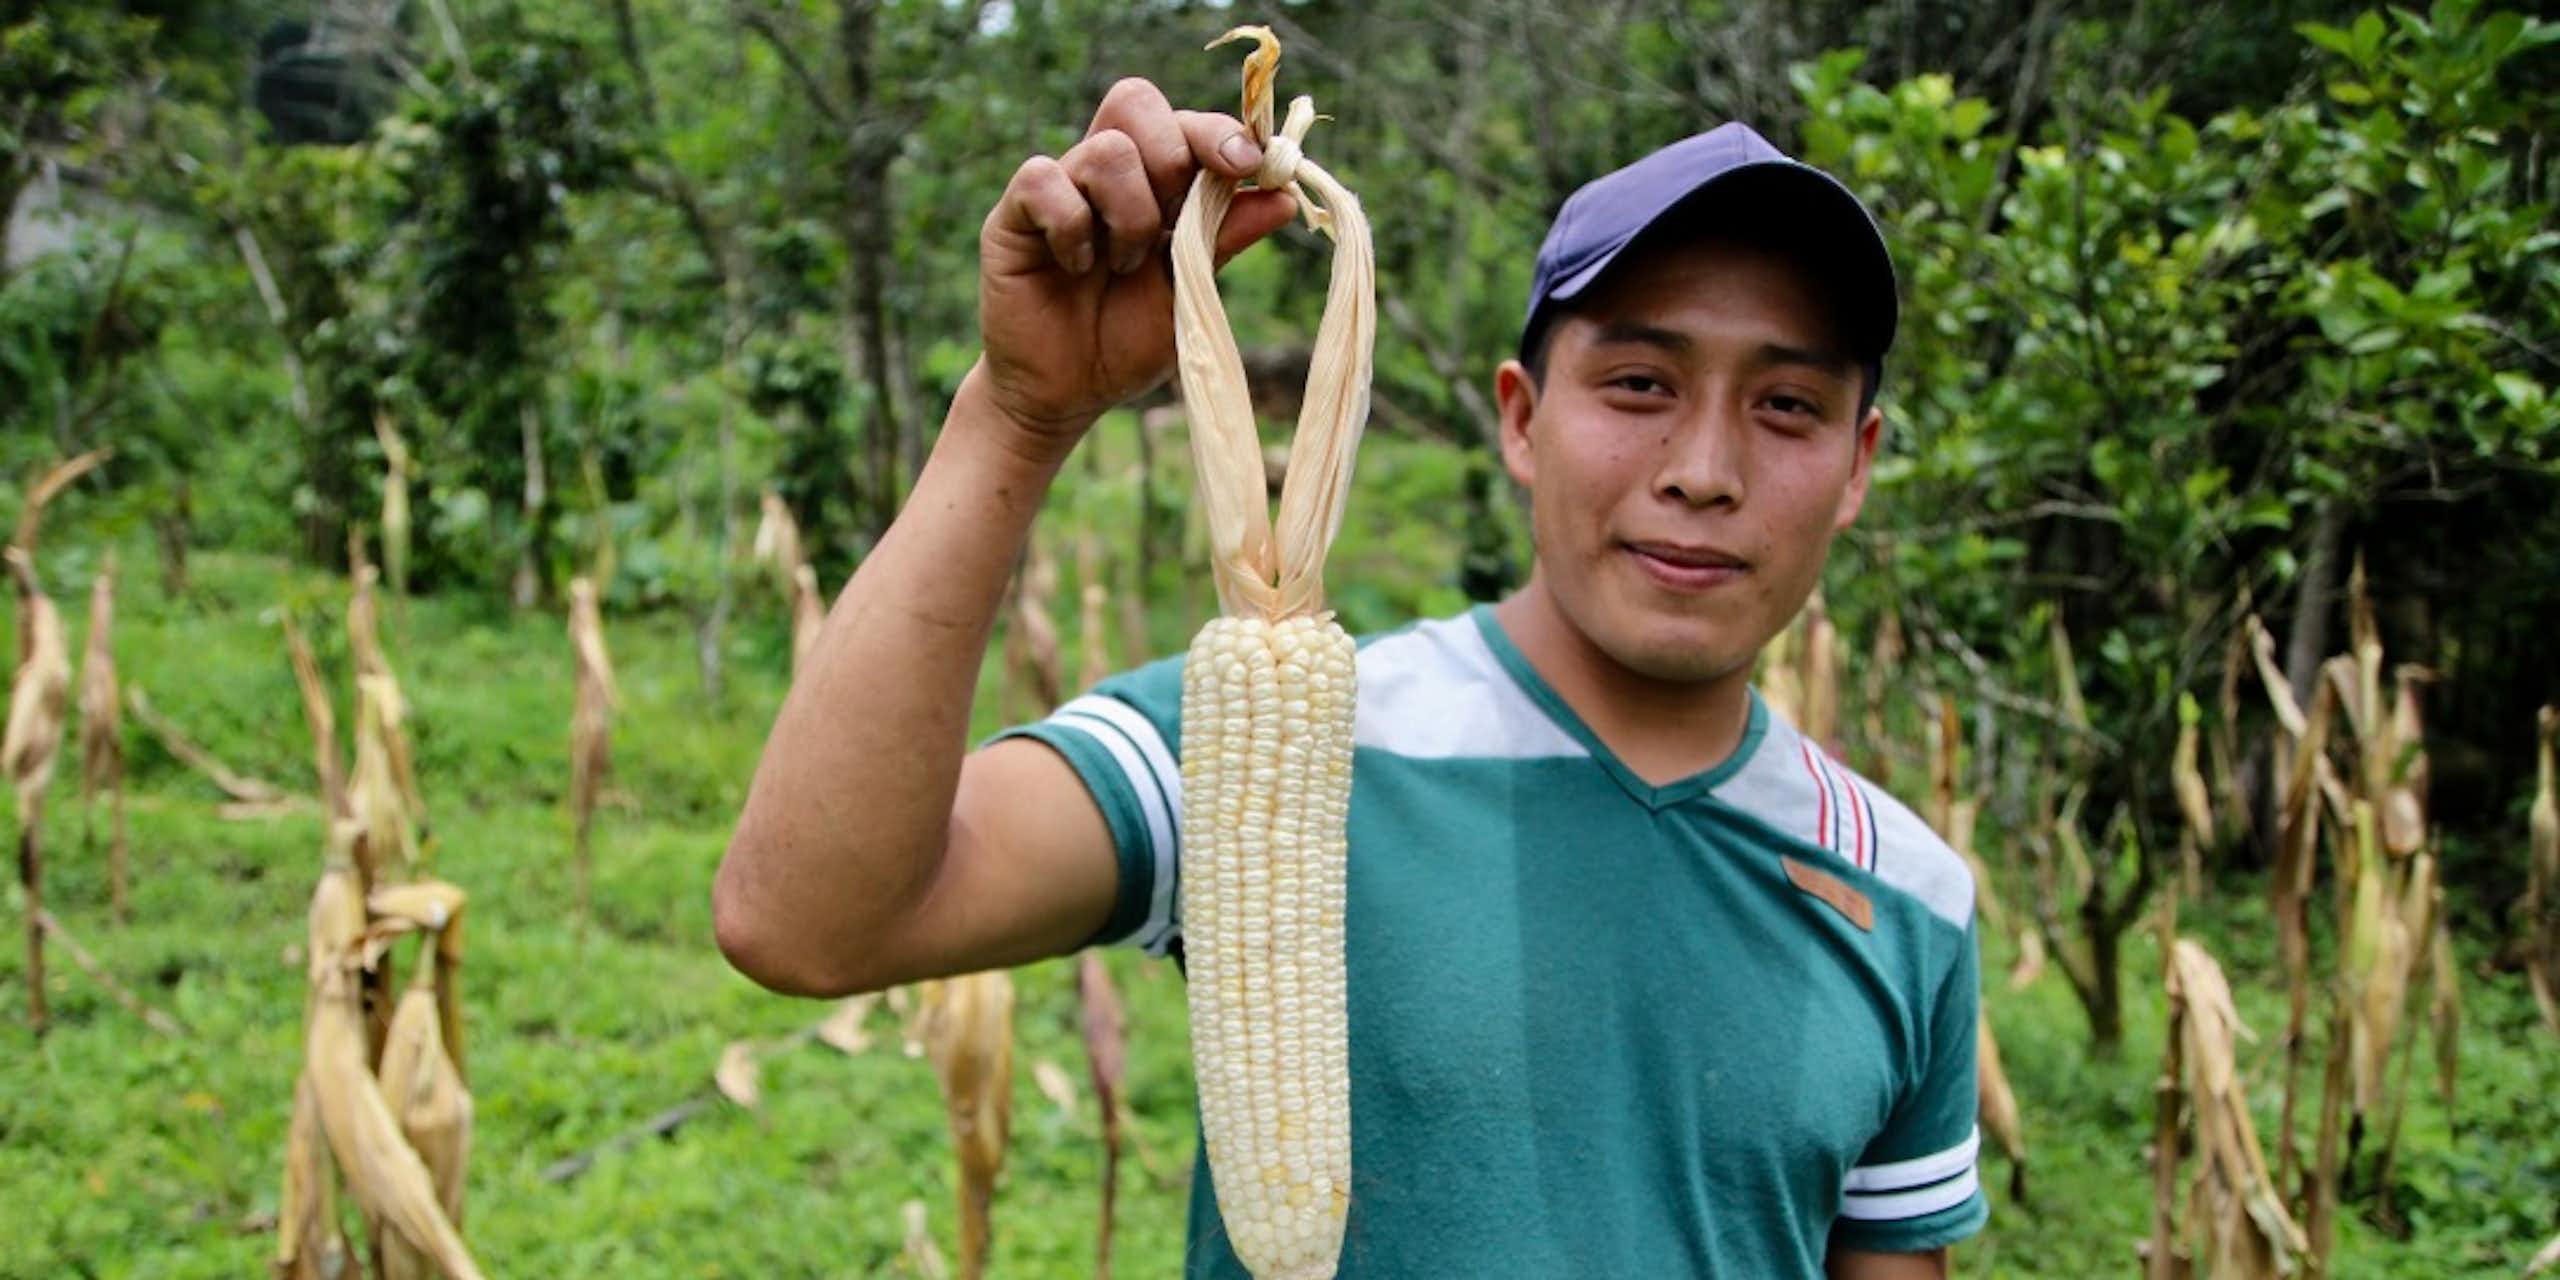 A young person holding freshly picked corn.